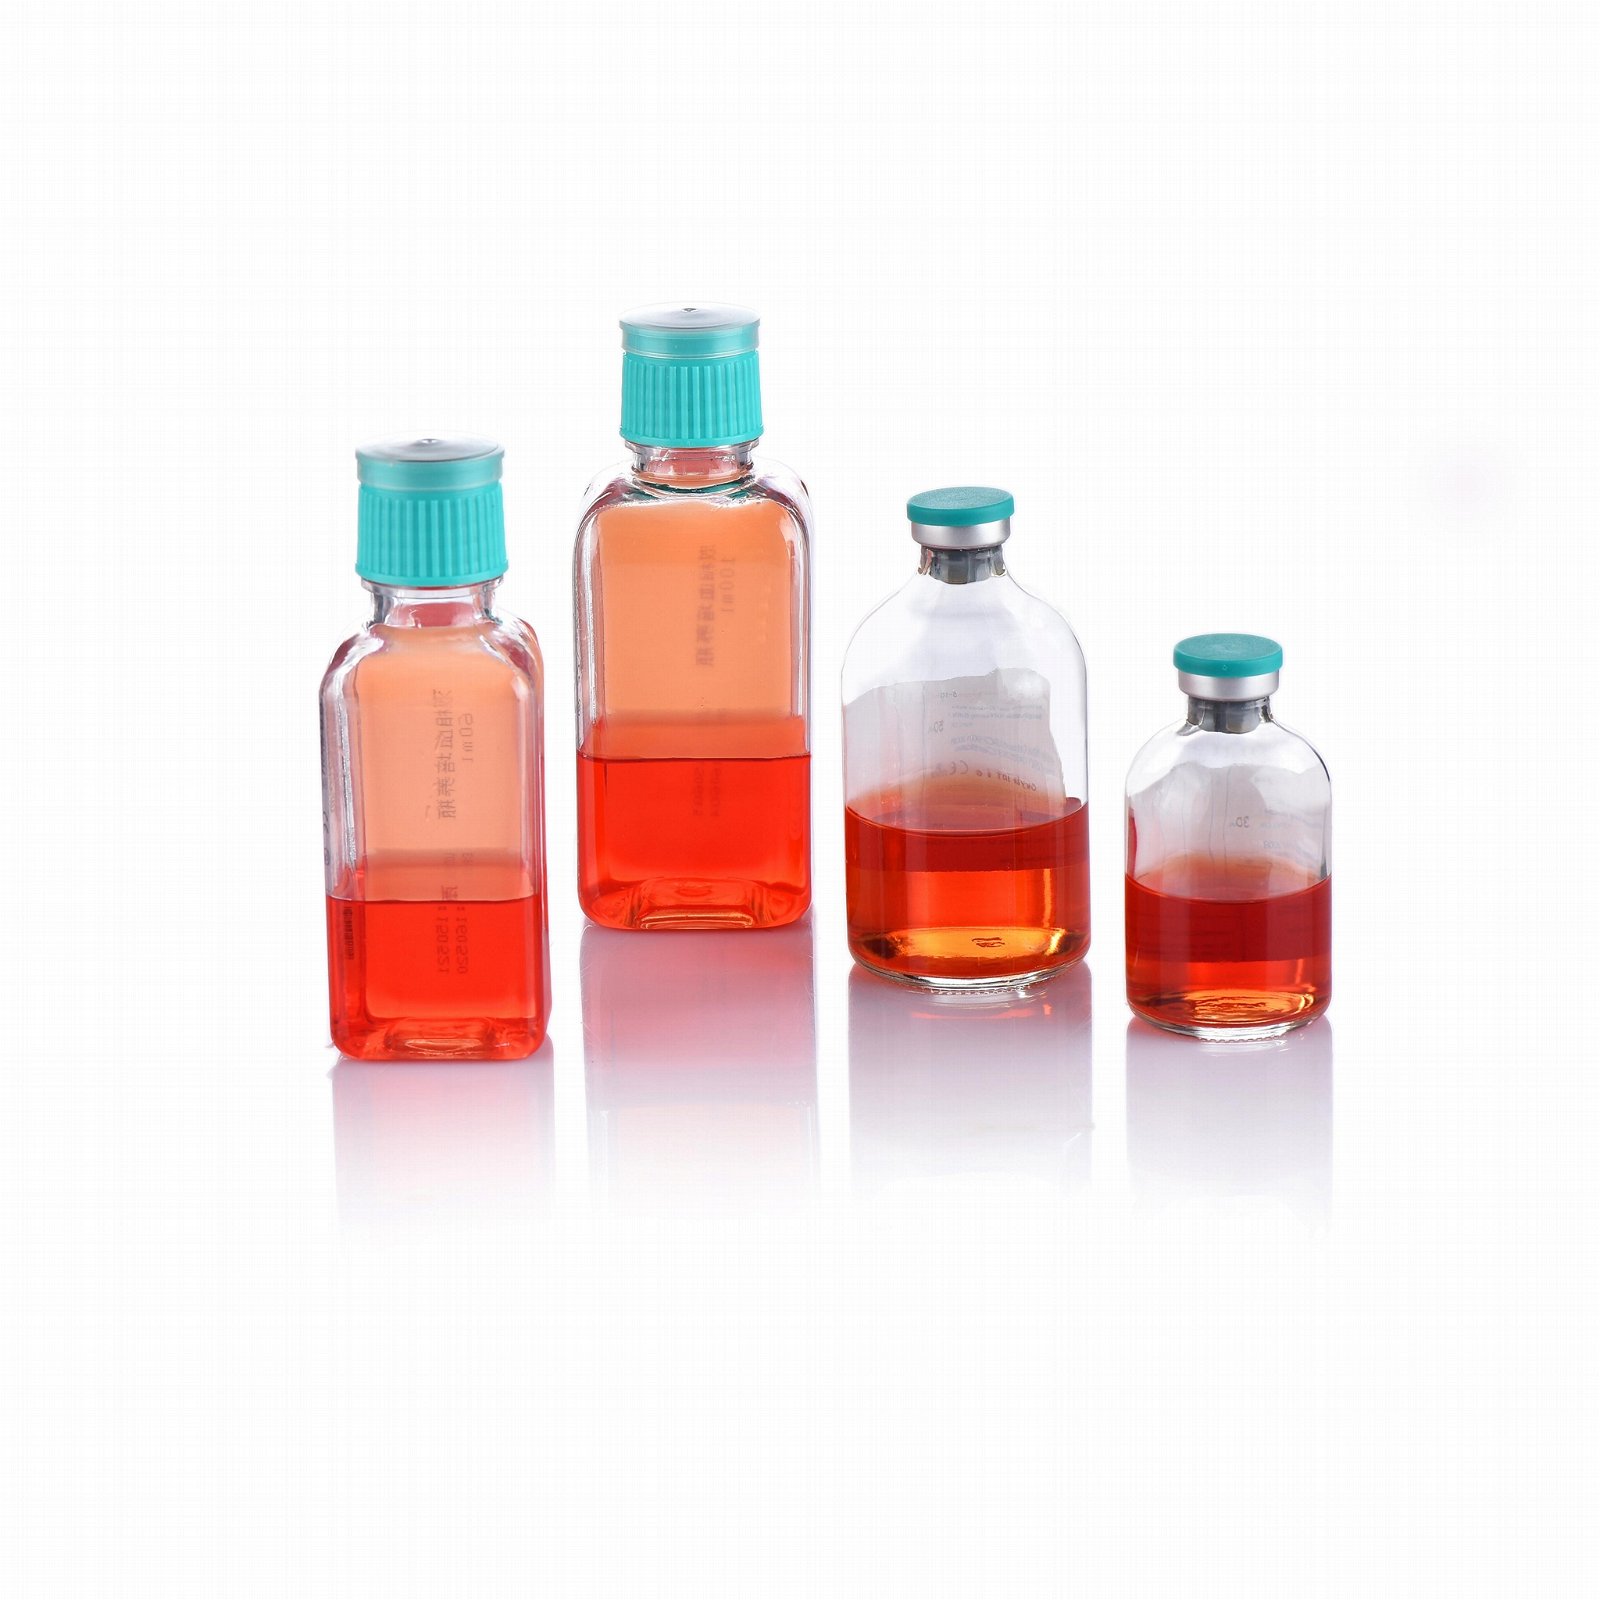 Blood Culturing Bottles for Manual Operation, Aerobic/Anaerobic 5